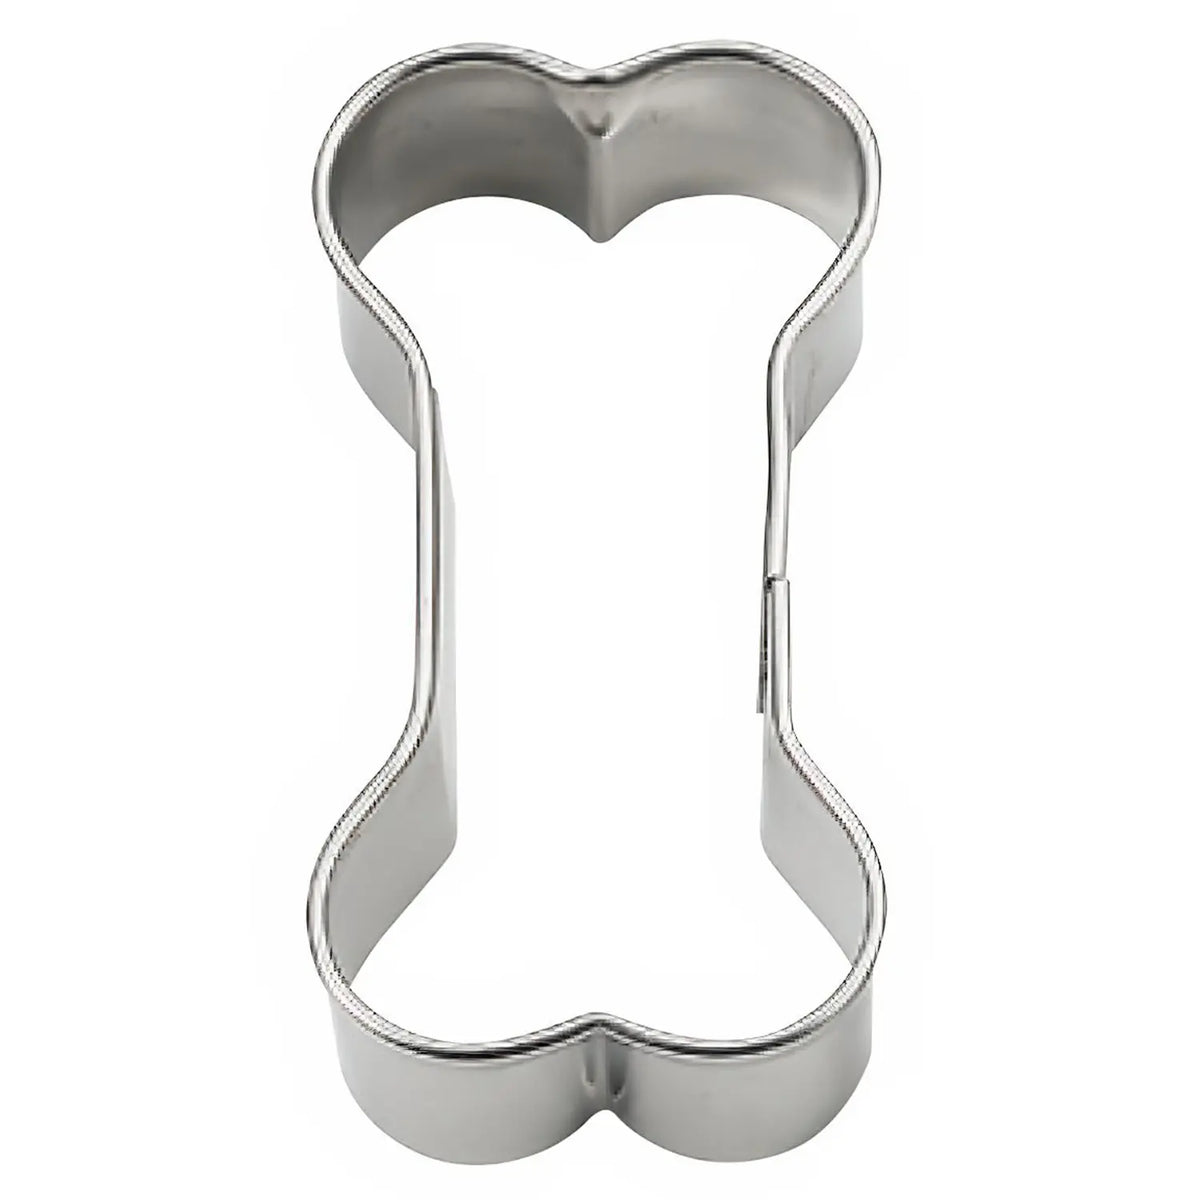 TIGERCROWN Cake Land Stainless Steel Cookie Cutter Dog Bone